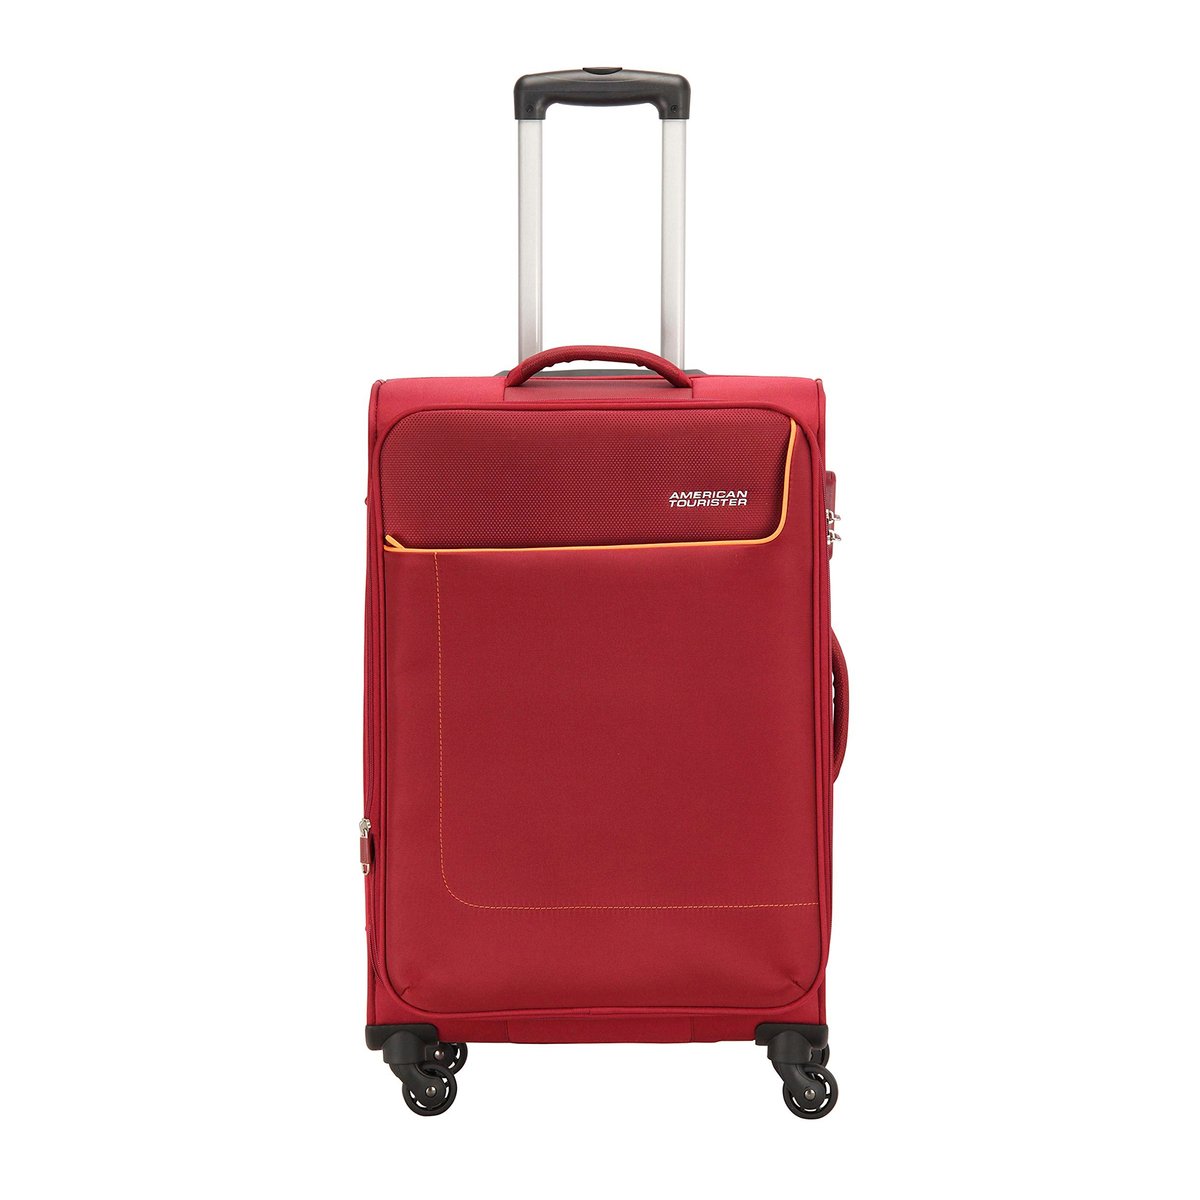 American Tourister Jamaica 4 Wheel Soft Trolley, 66 cm, Red